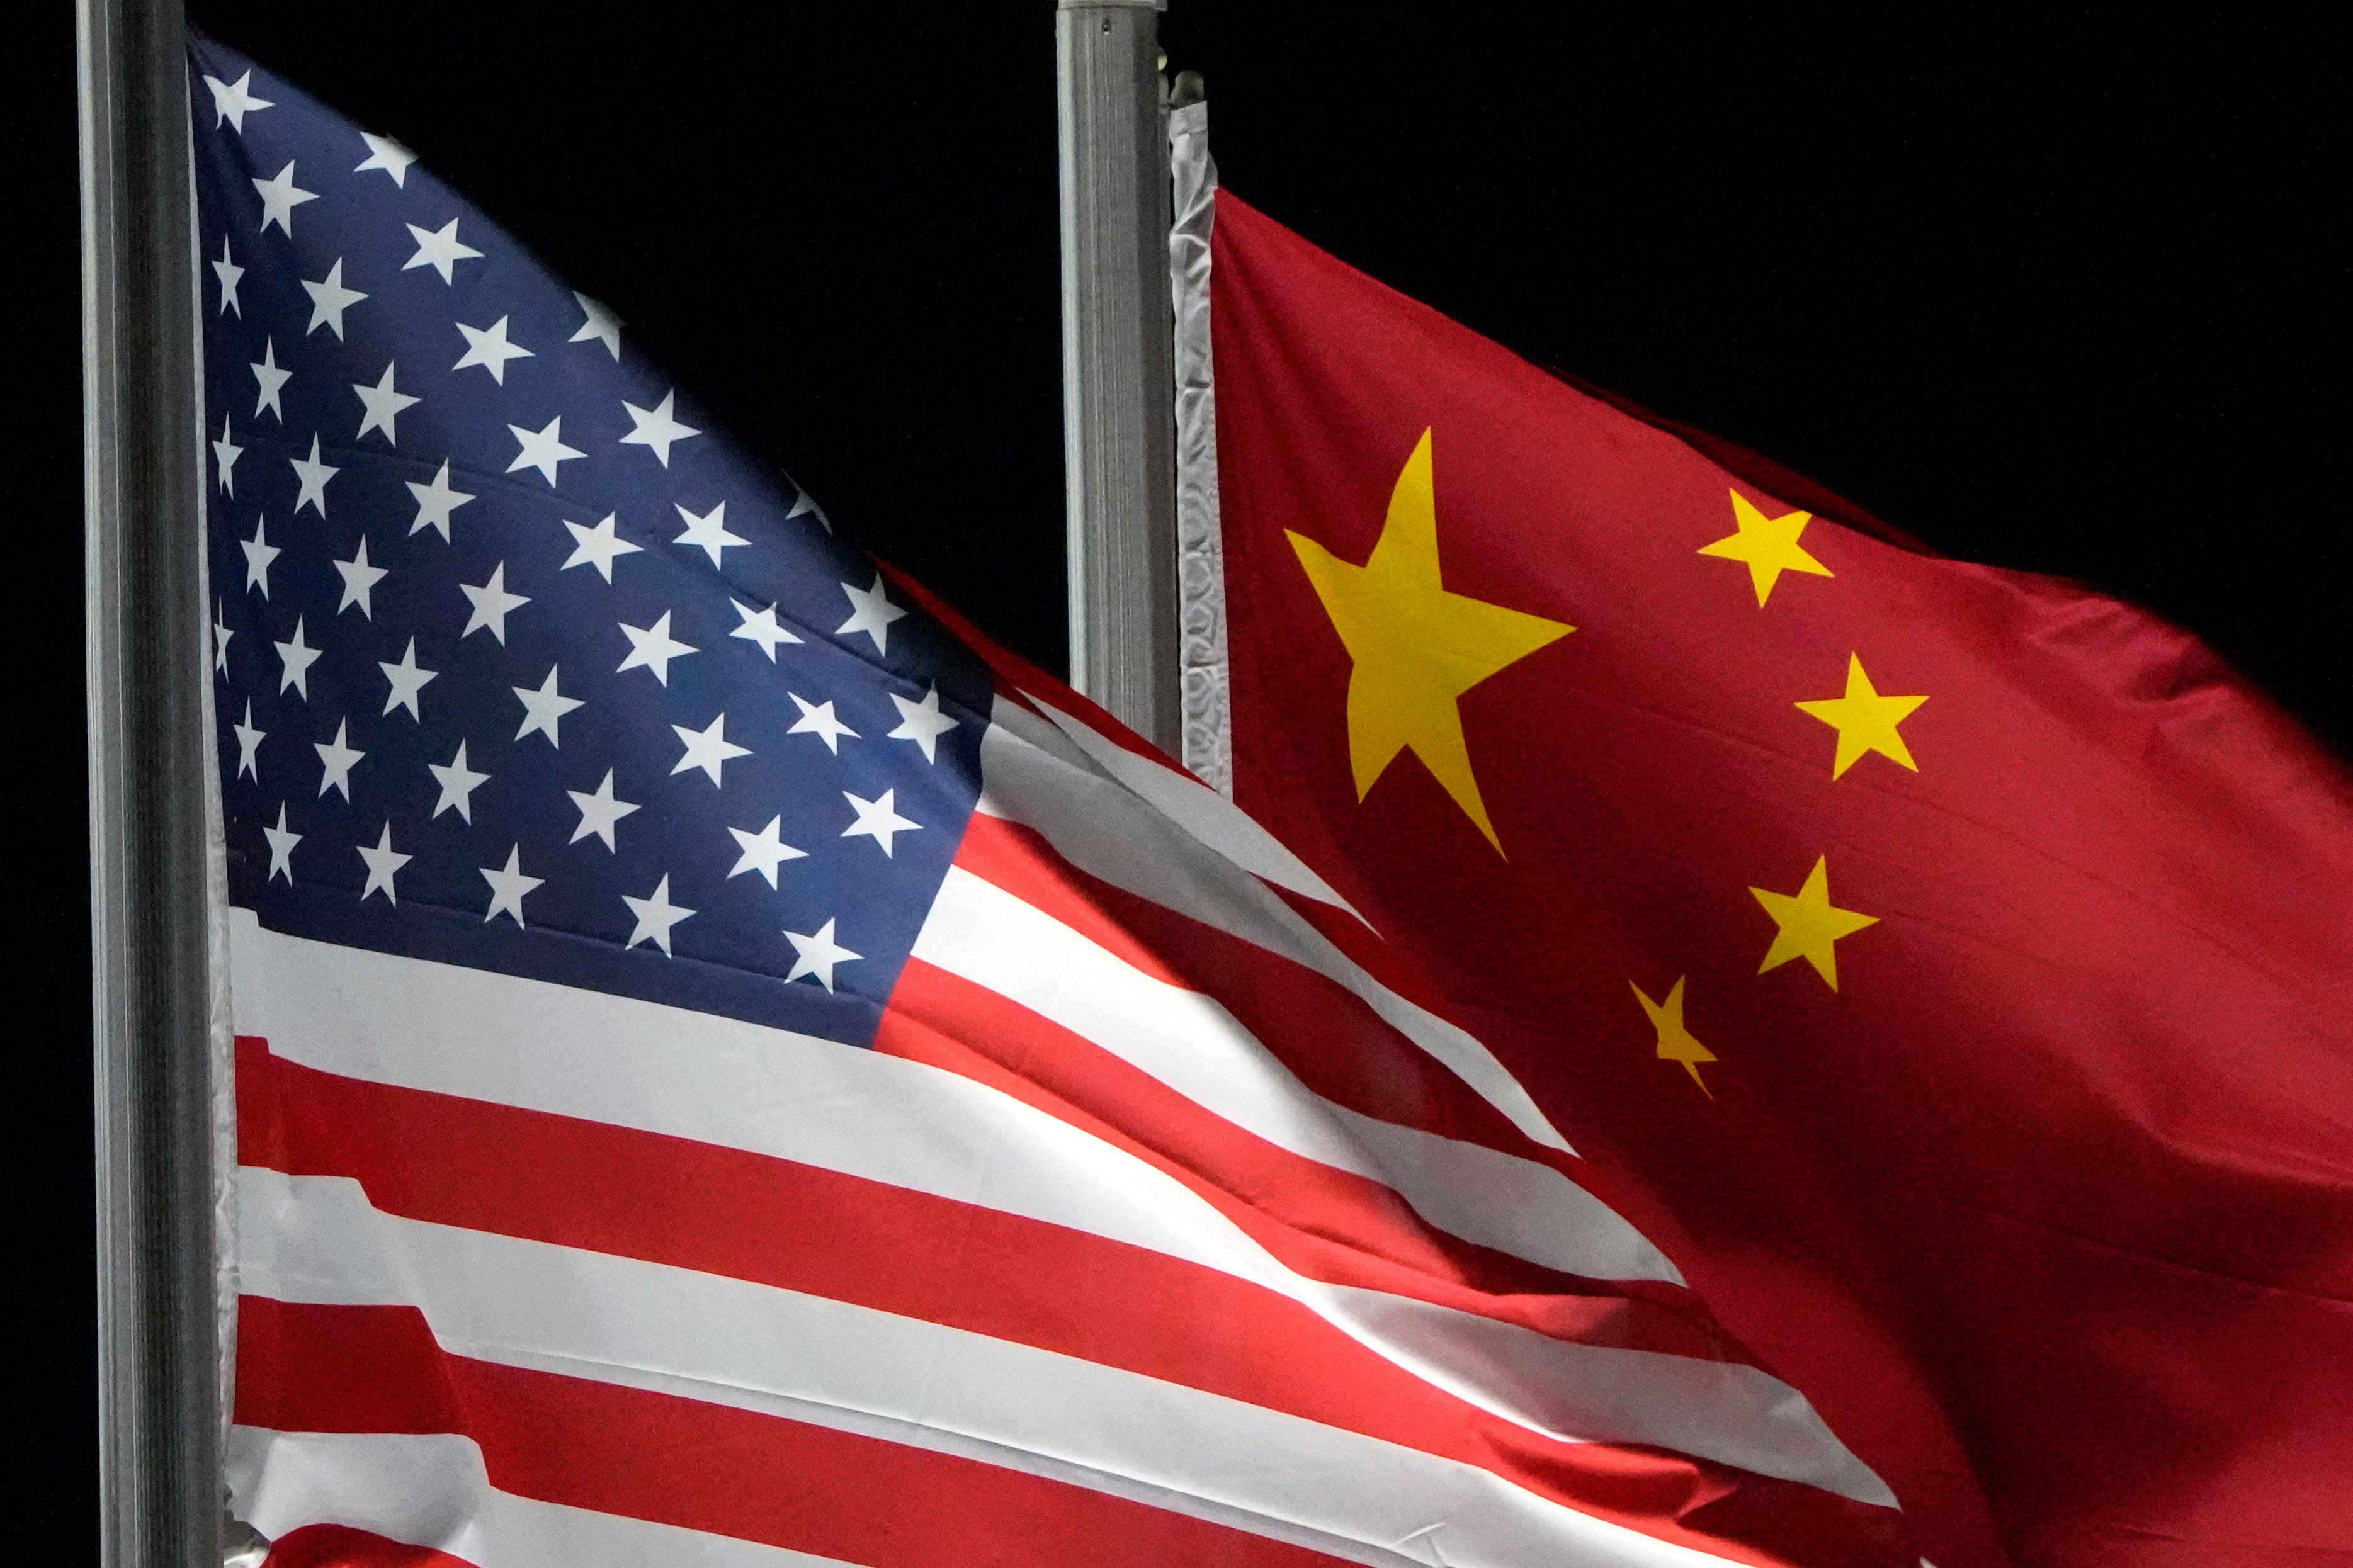 The American and Chinese flags. Photo: AP